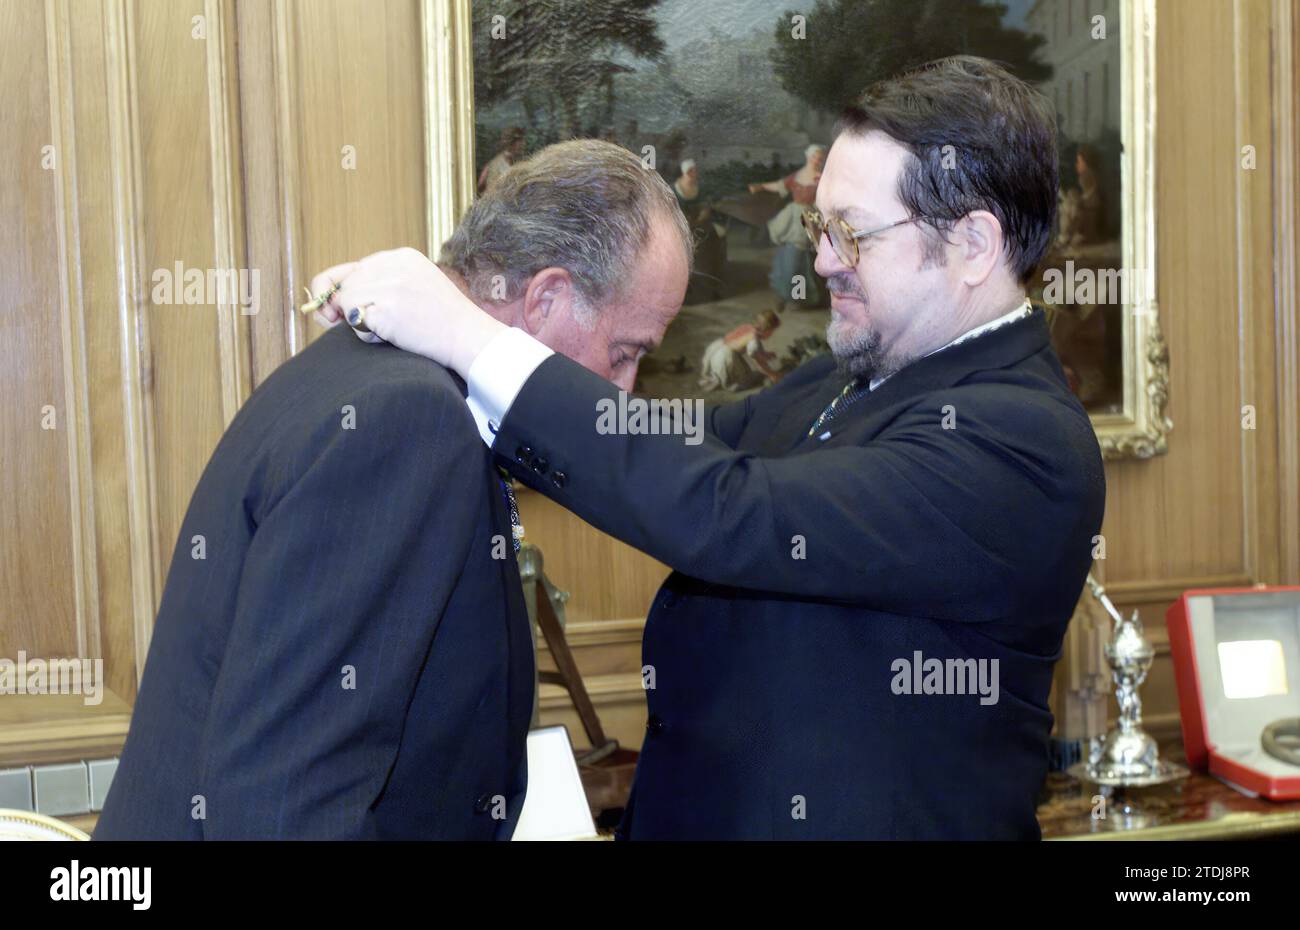 Madrid, 01/15/2003. Audience of King Don Juan Carlos in the Zarzuela Palace at the Royal Academy of Extremadura, directed by José Miguel Santiago Castelo, to present him with the Academy's gold medal. Credit: Album / Archivo ABC / José García Stock Photo